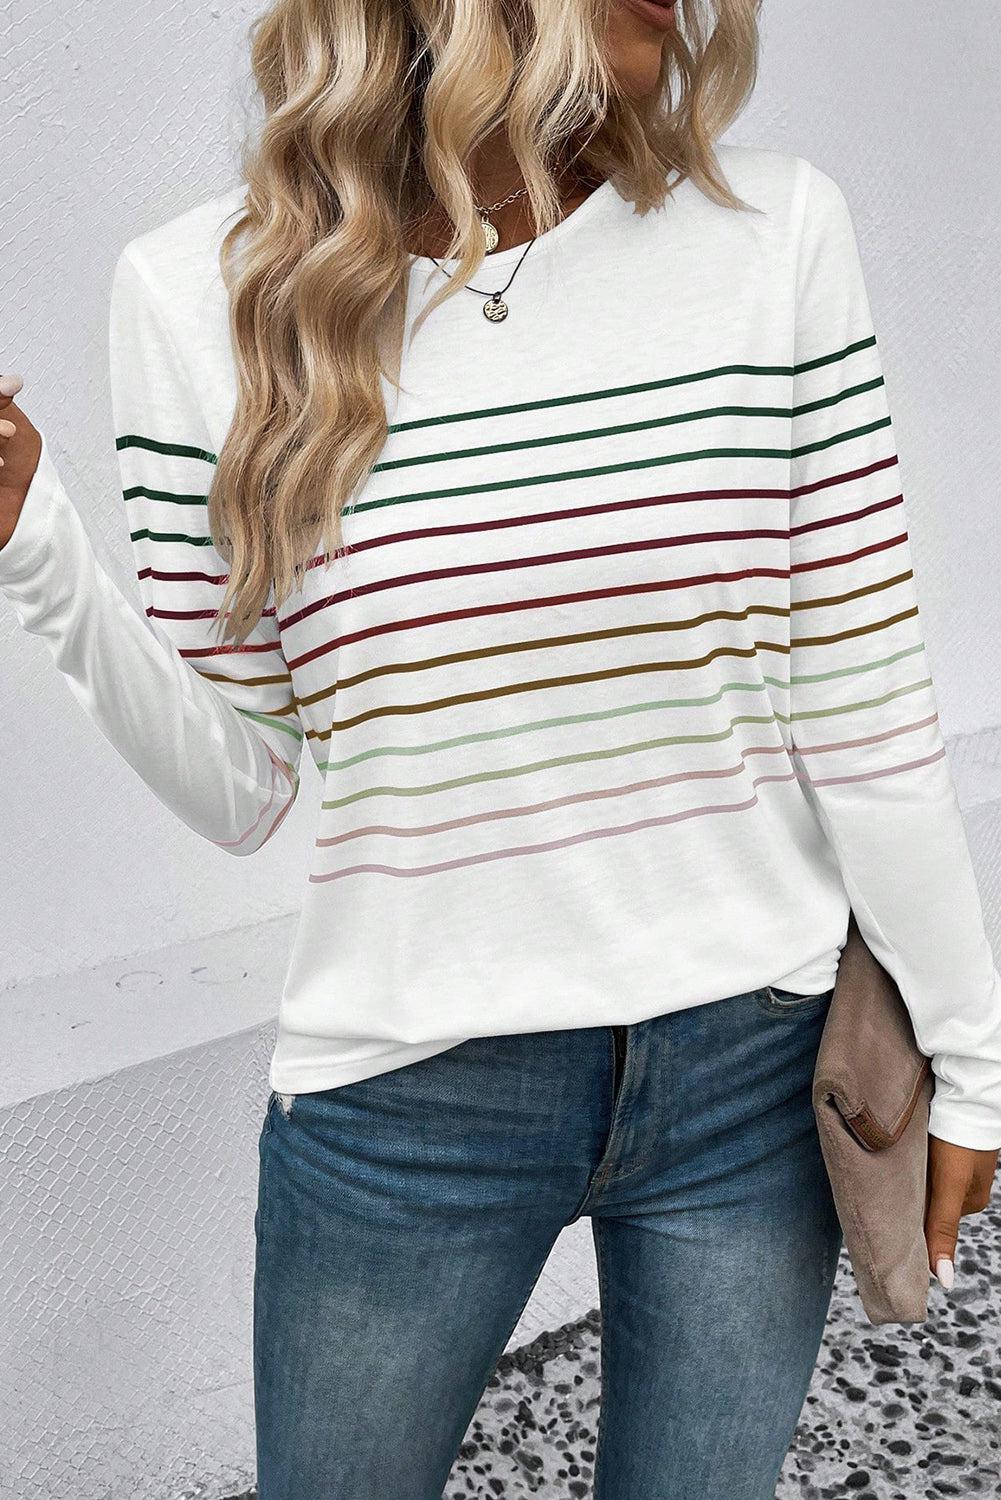 a woman wearing a white striped sweater and jeans